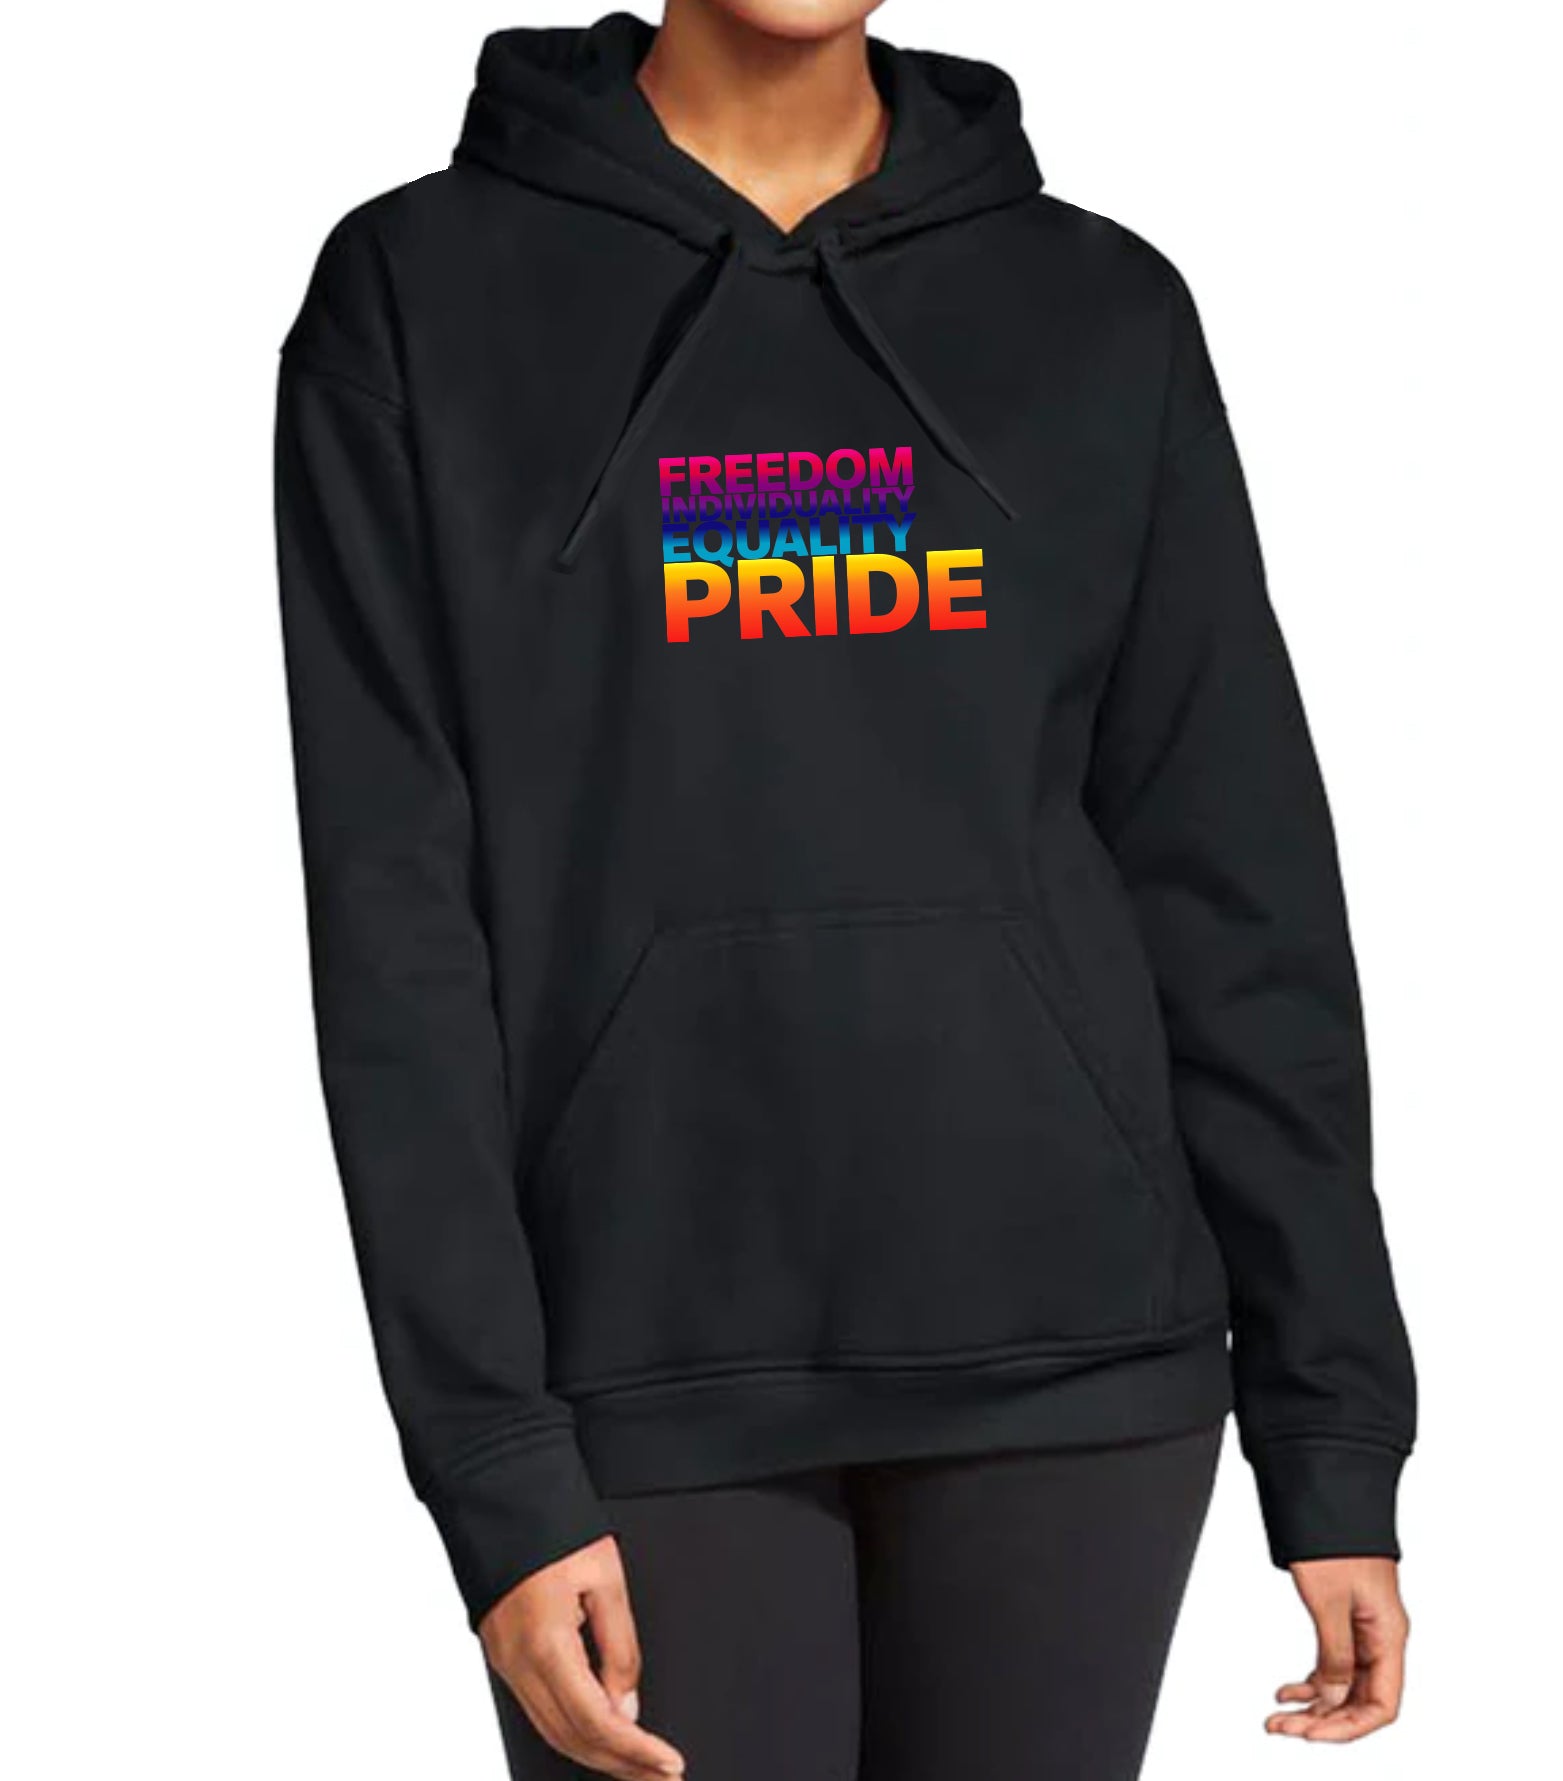 Freedom, Equality, Individuality, Pride UNISEX Hoodie - Available in More Colors